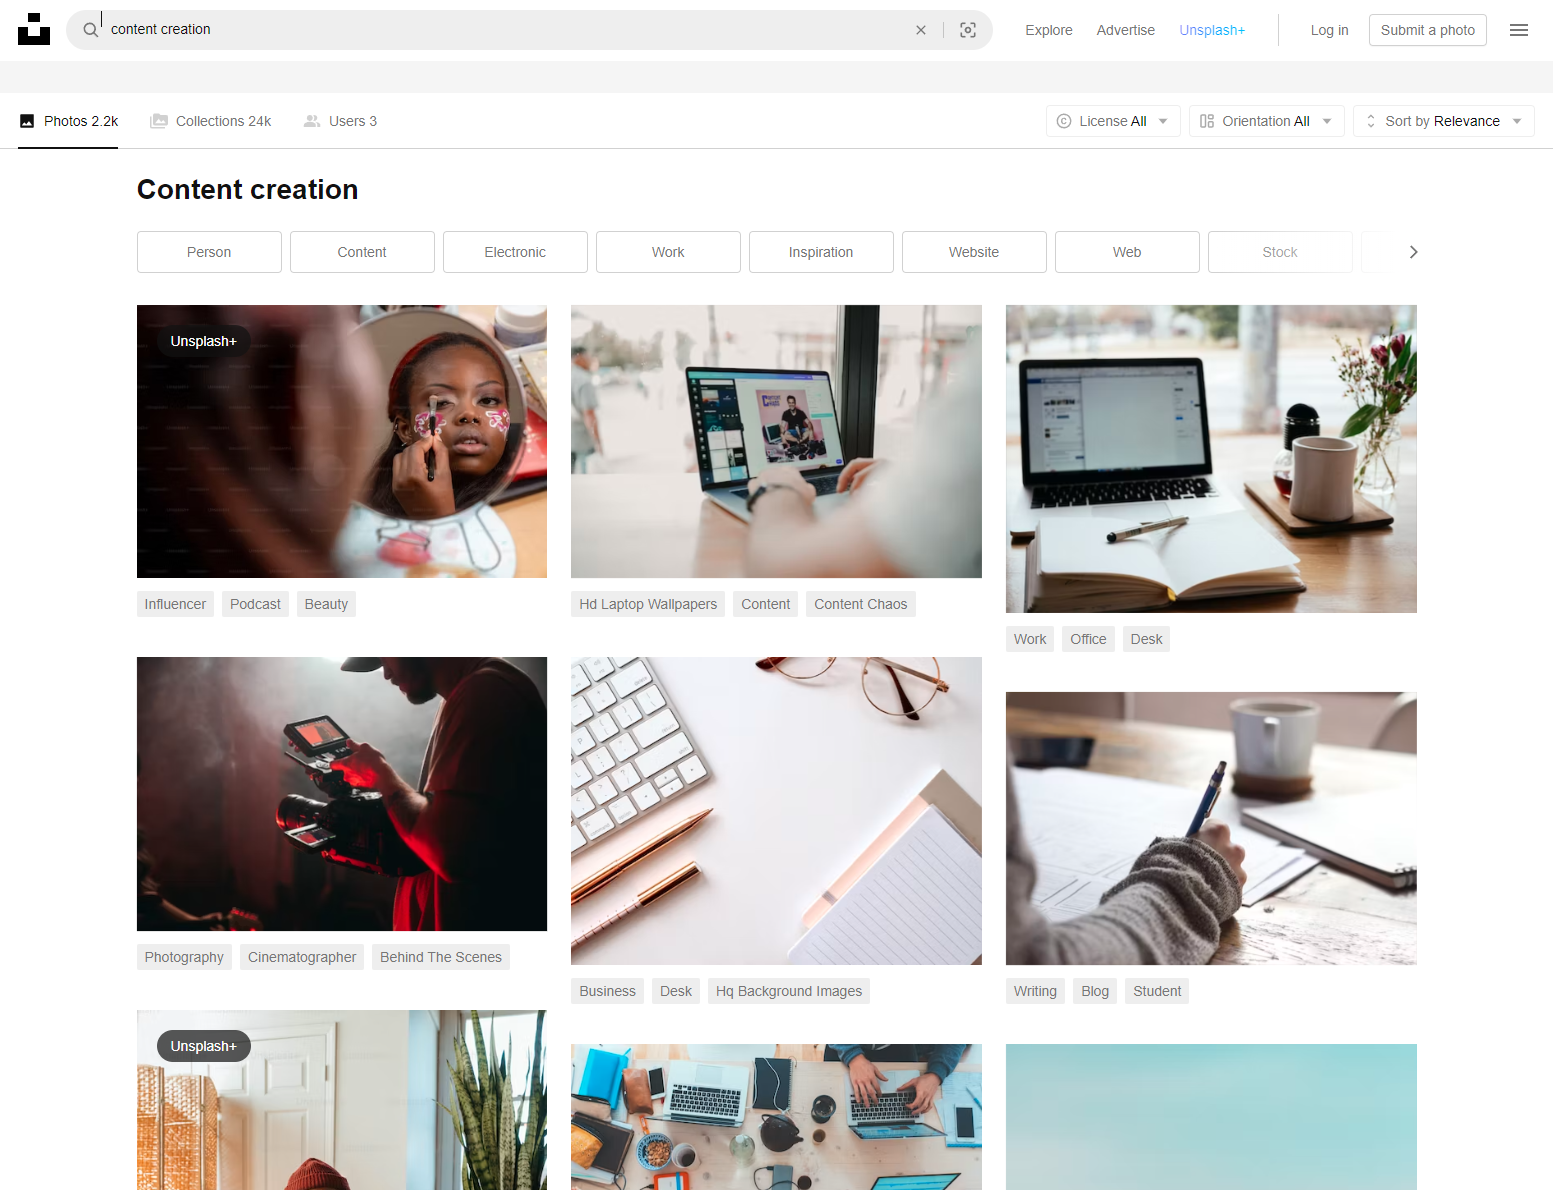 An example of an image search in Unsplash.